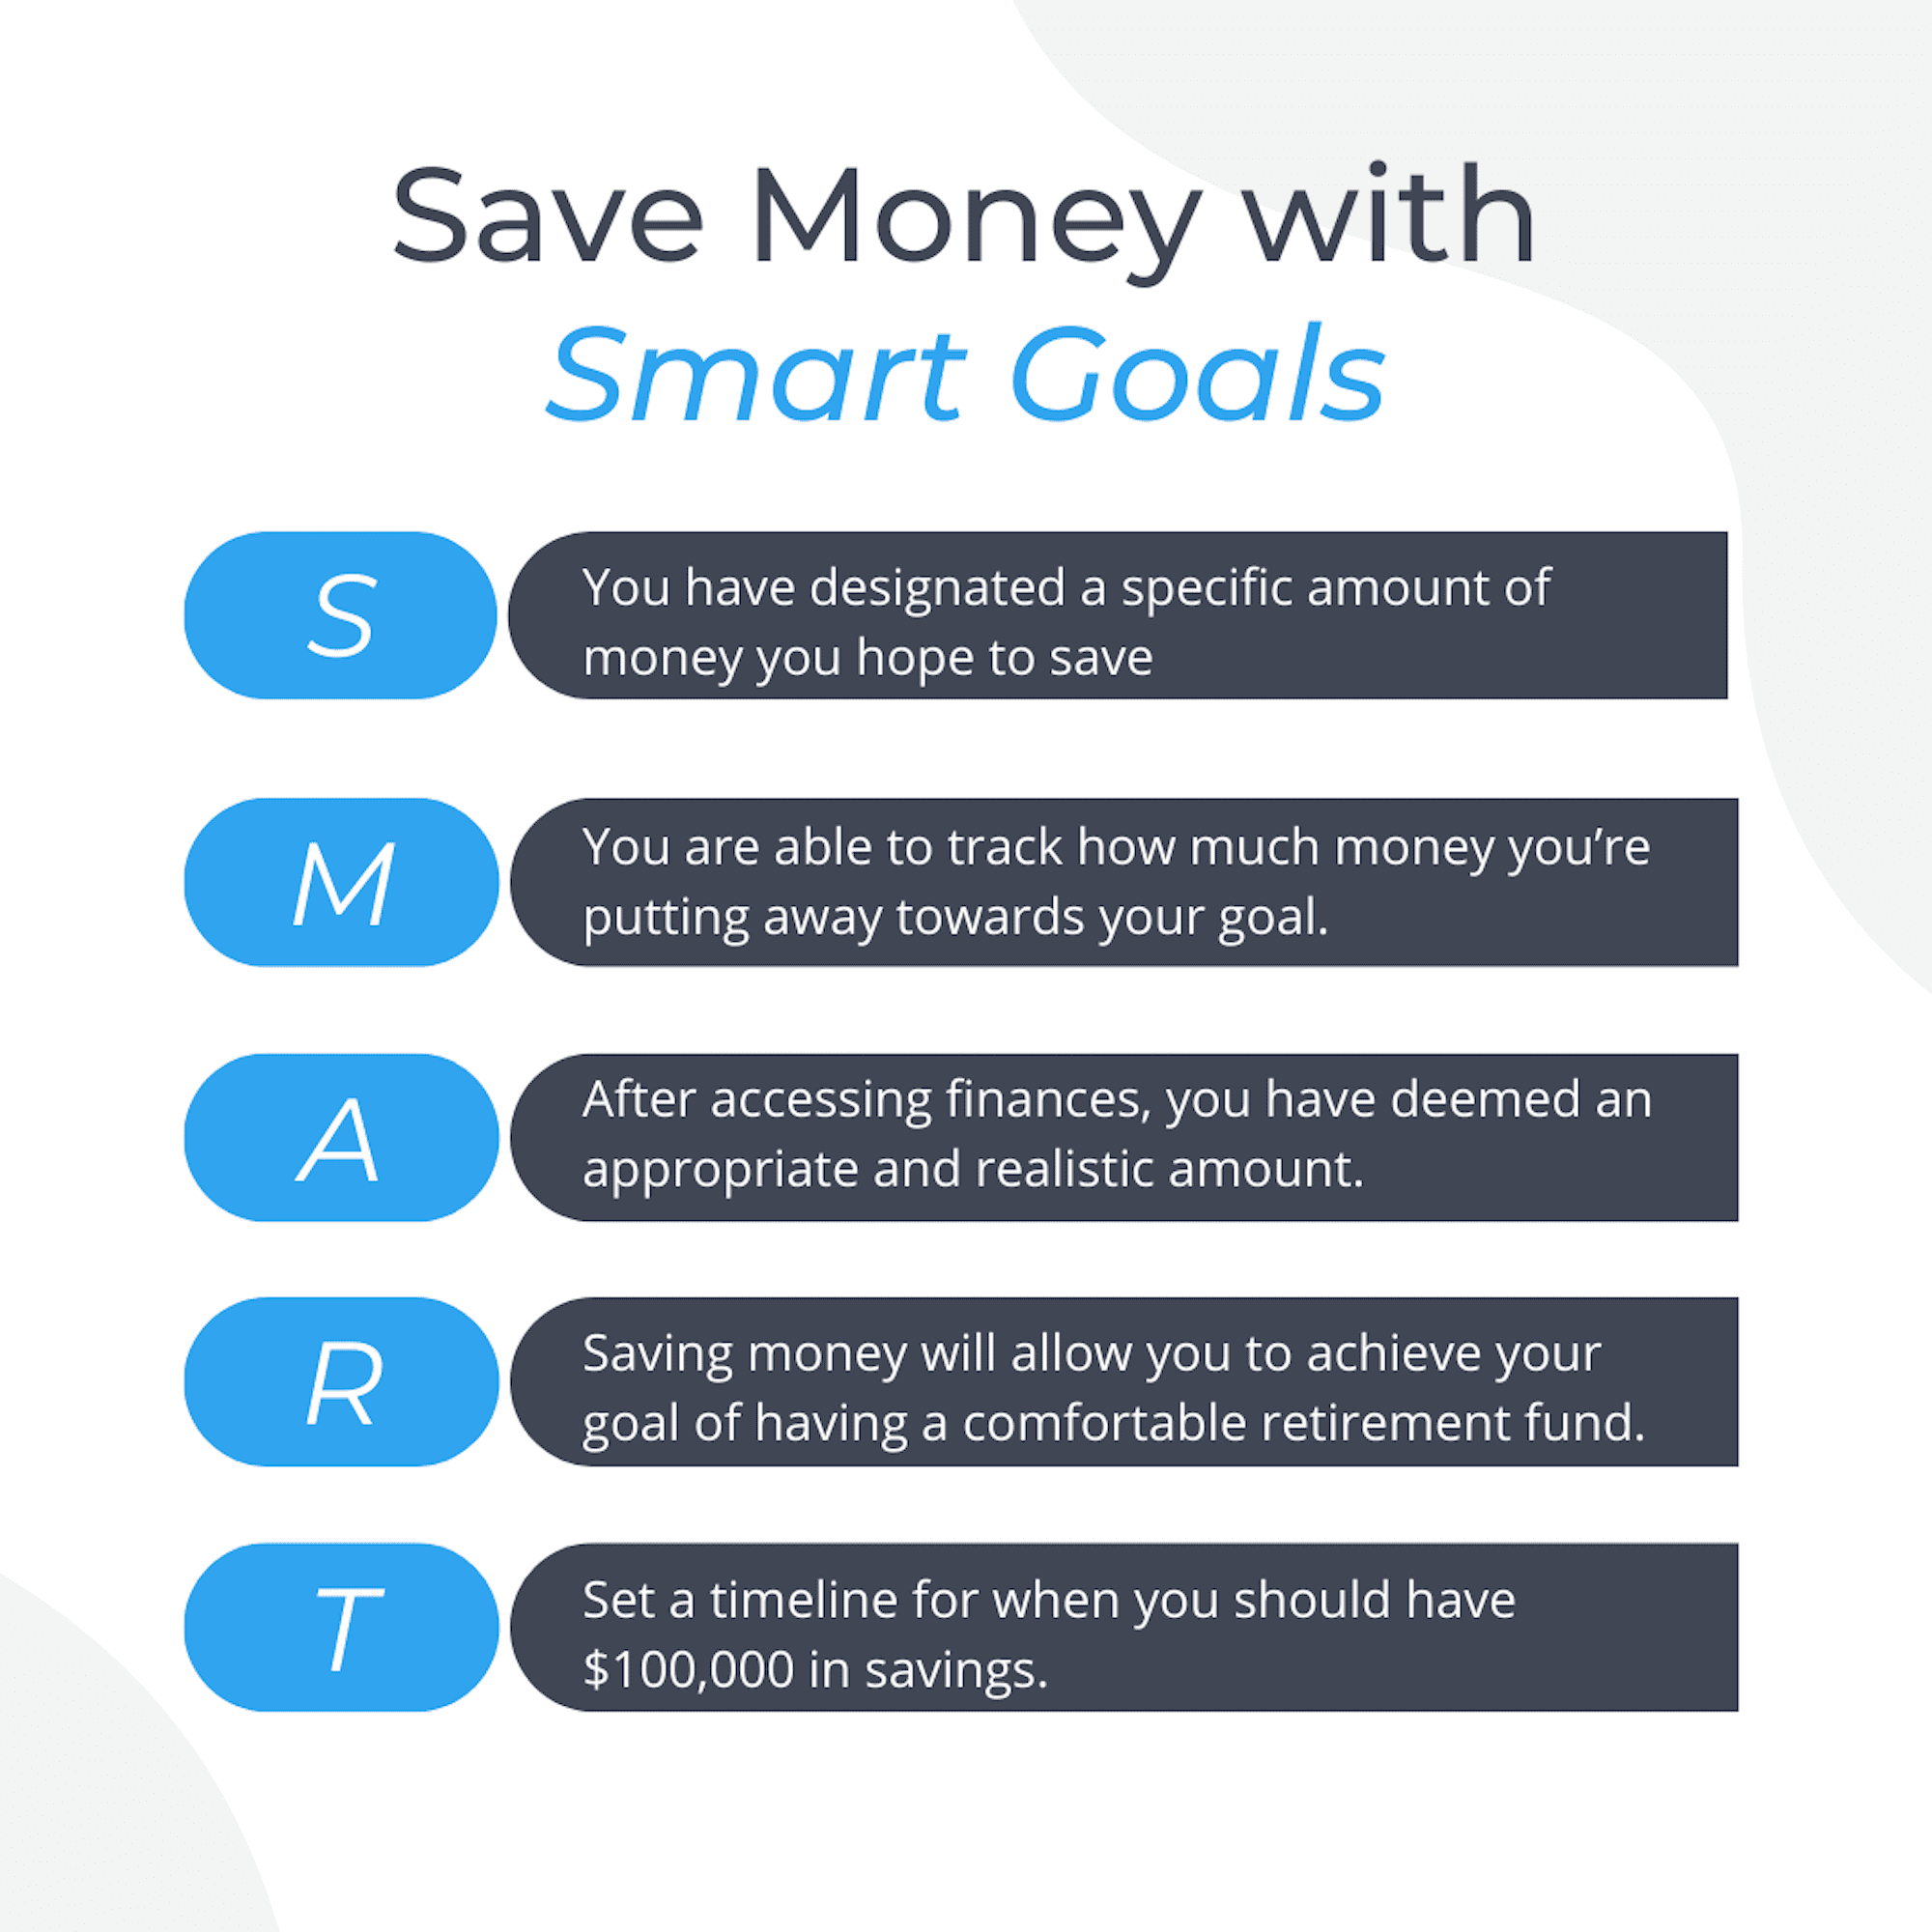 A Simple 6 Step Process For Setting Smart Goals (With Examples!)